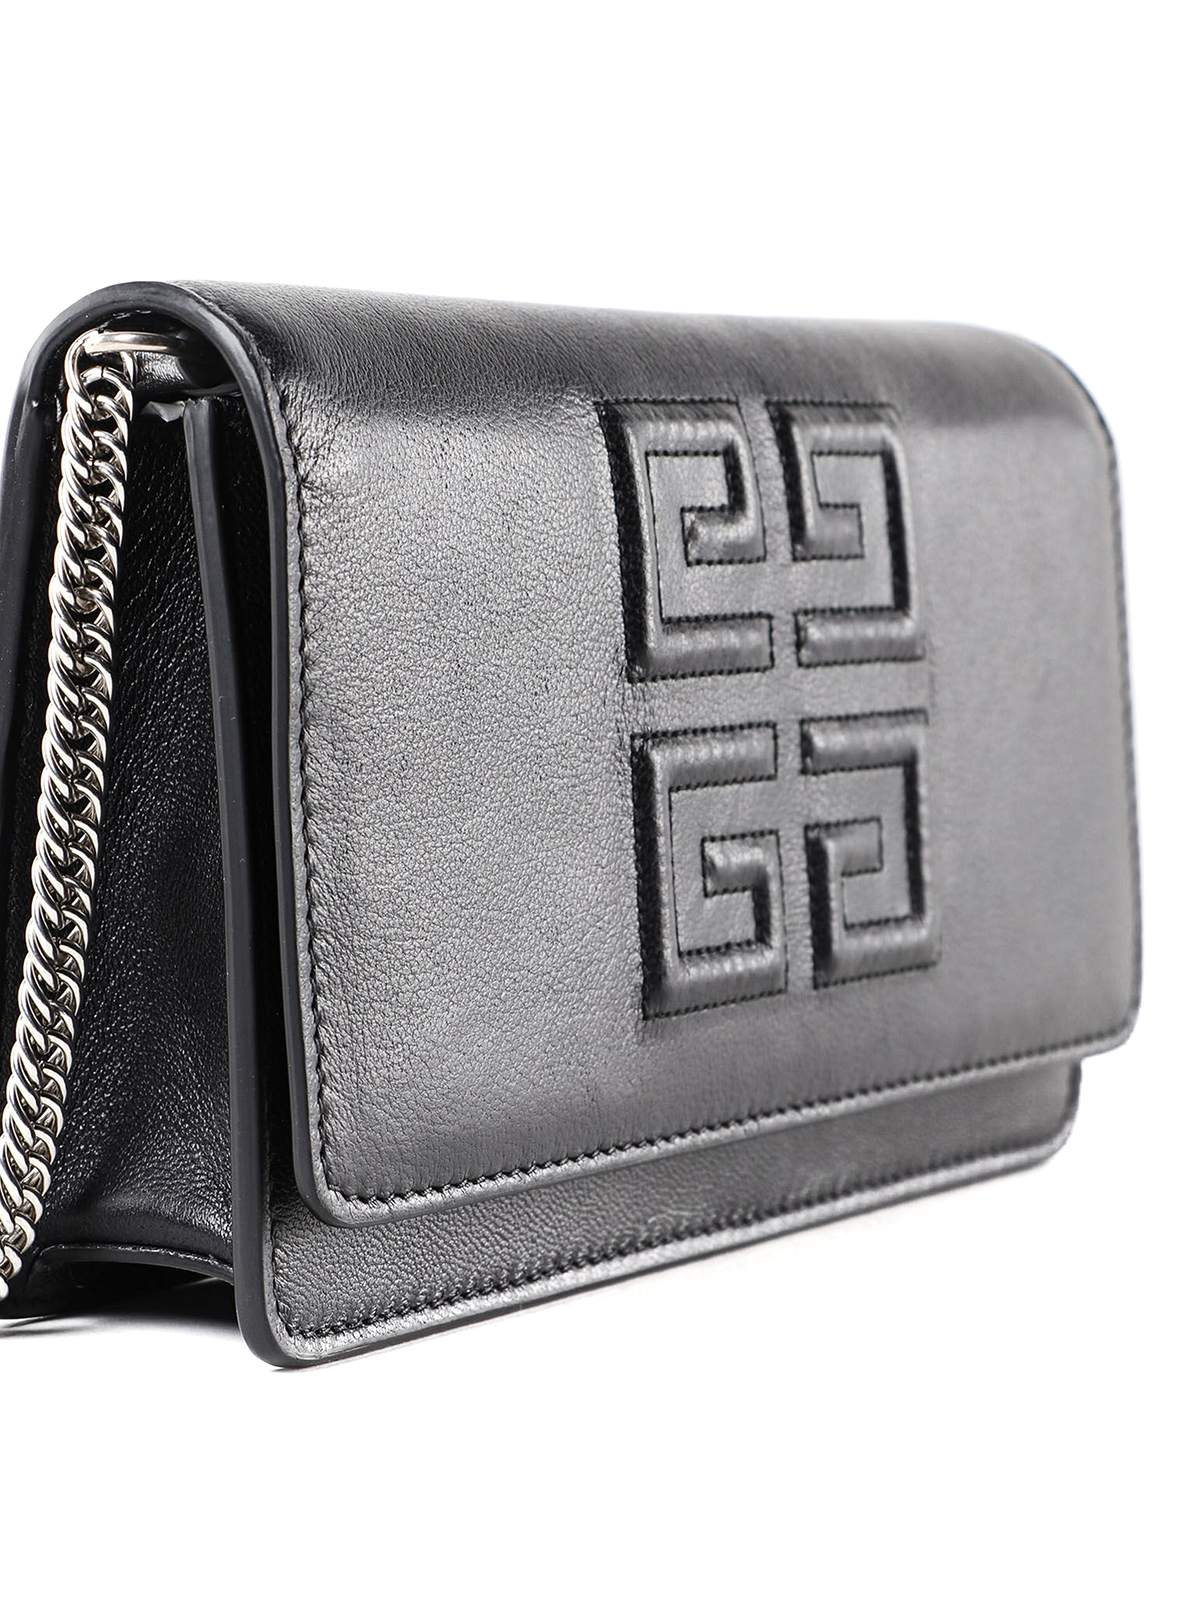 givenchy emblem wallet on chain